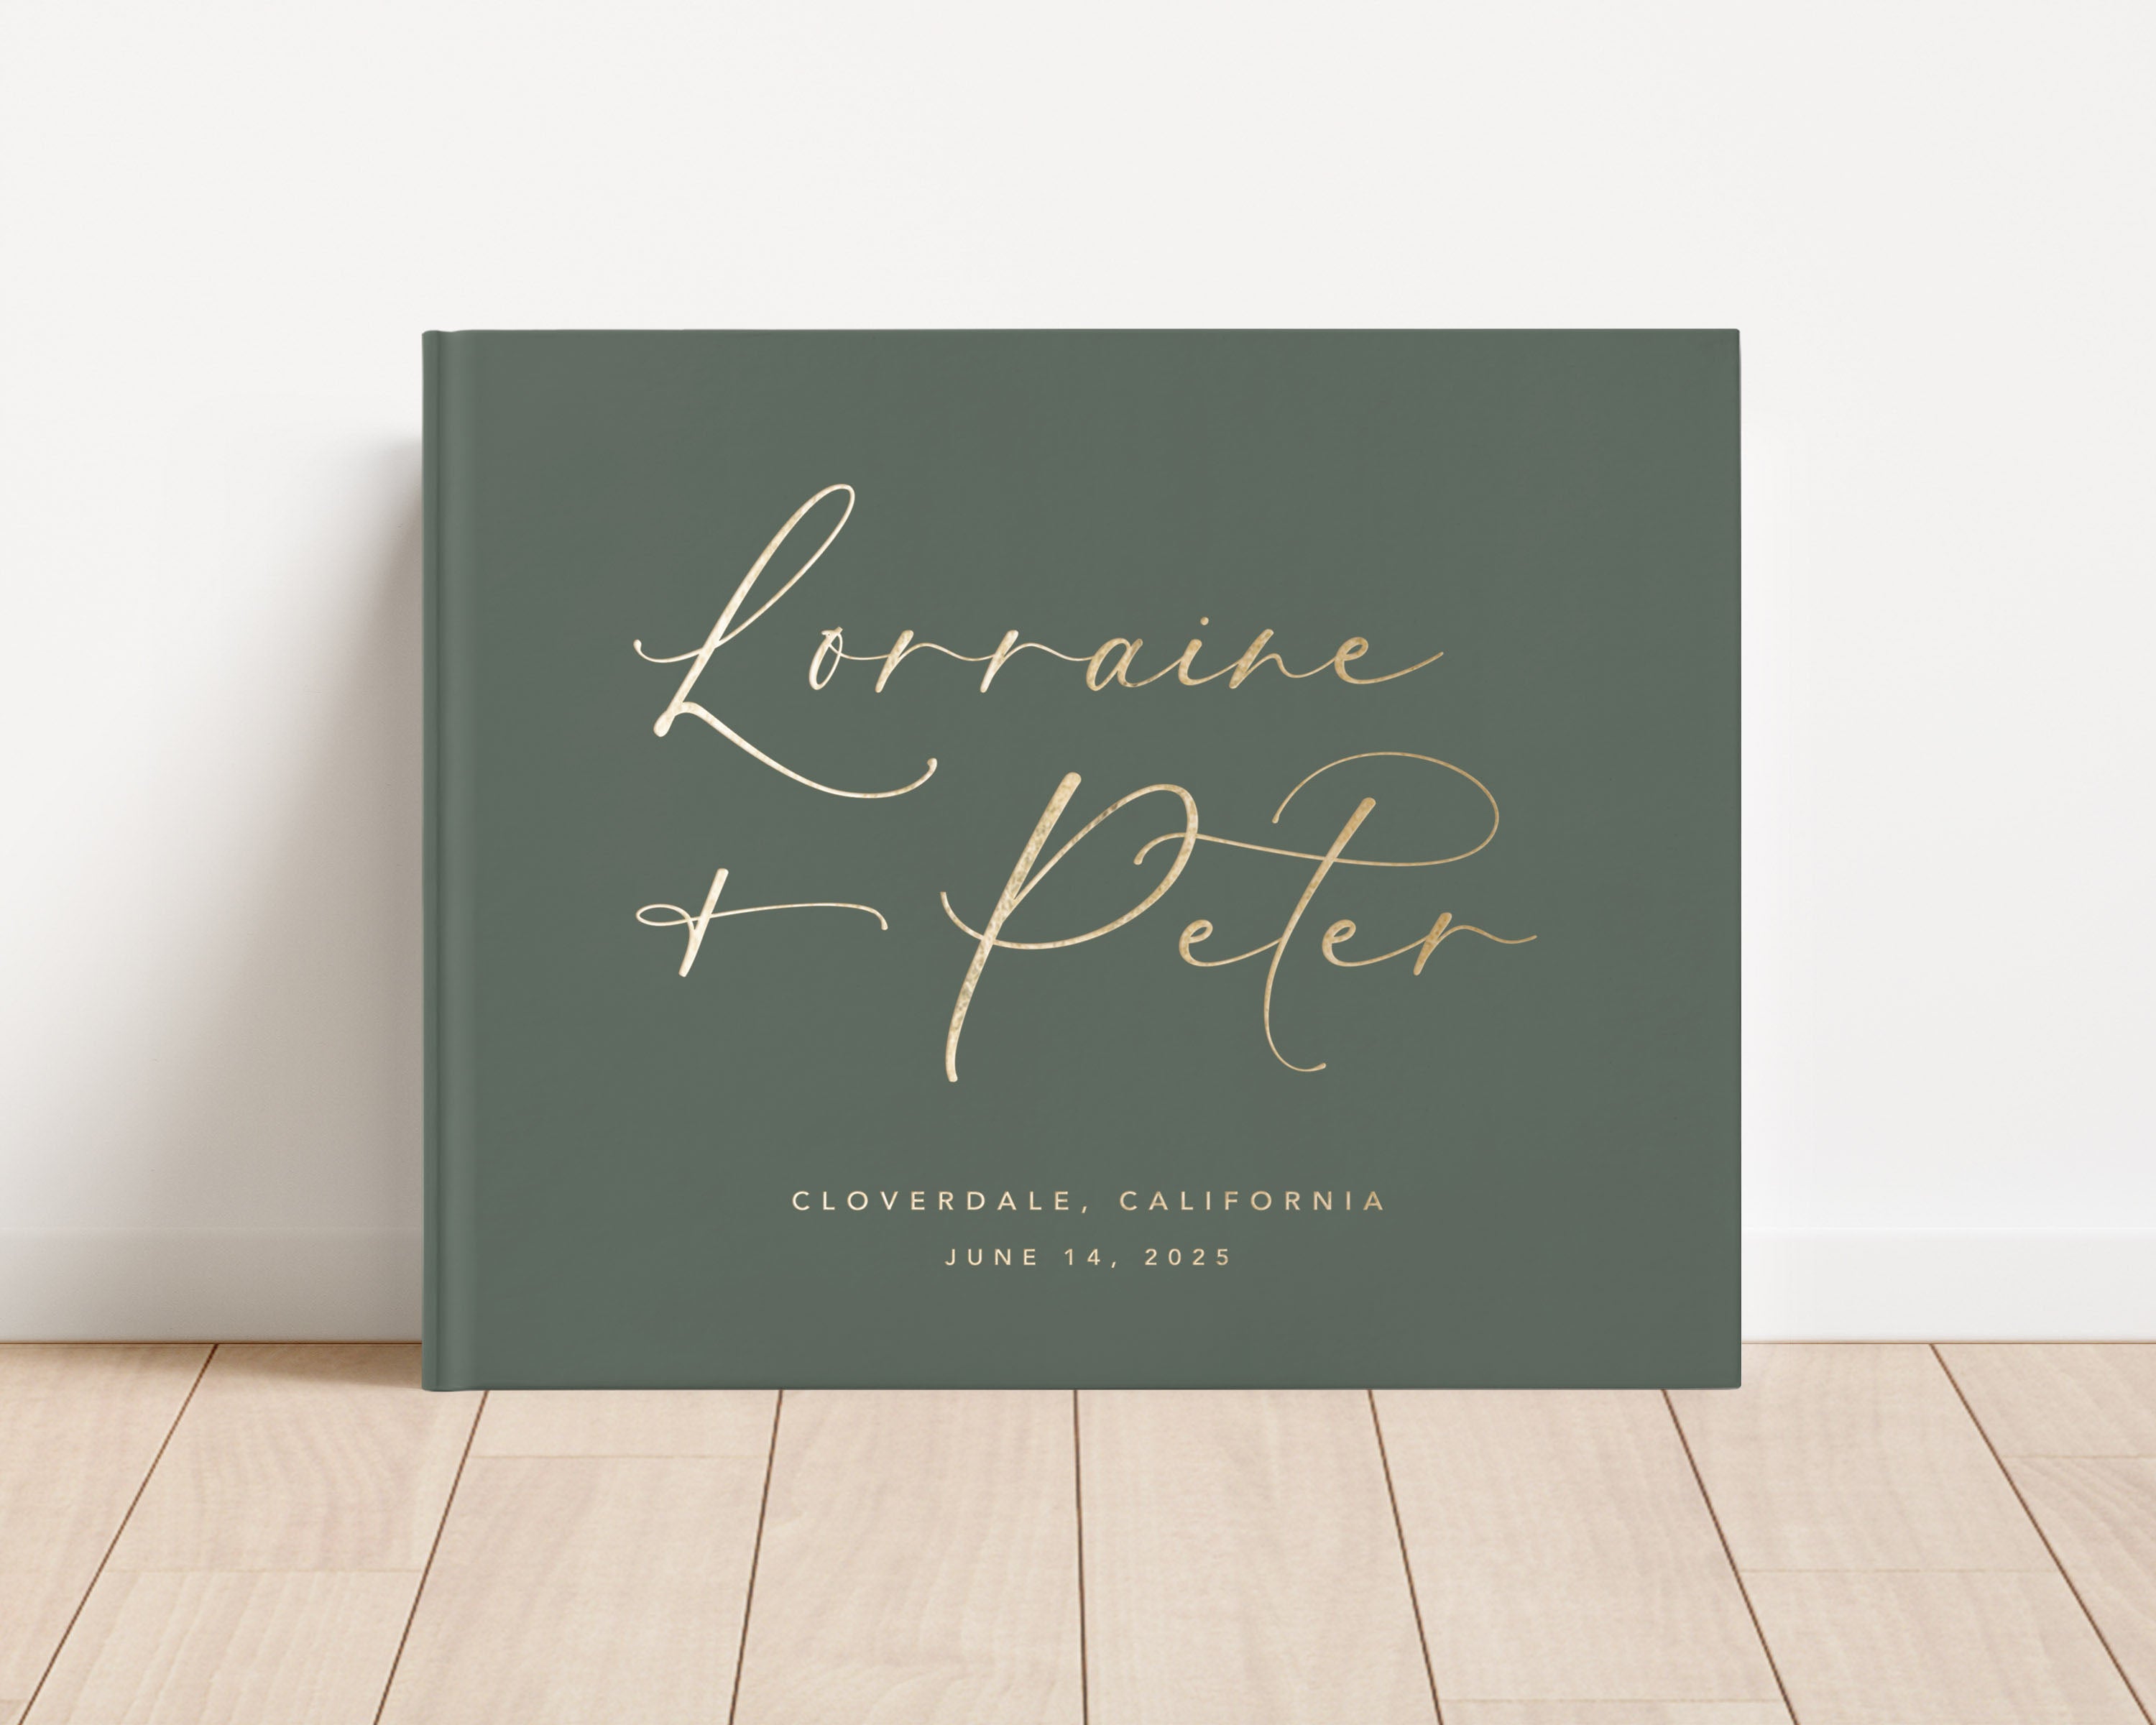 Luxury wedding guest book with custom gold foil text and green hardback cover.